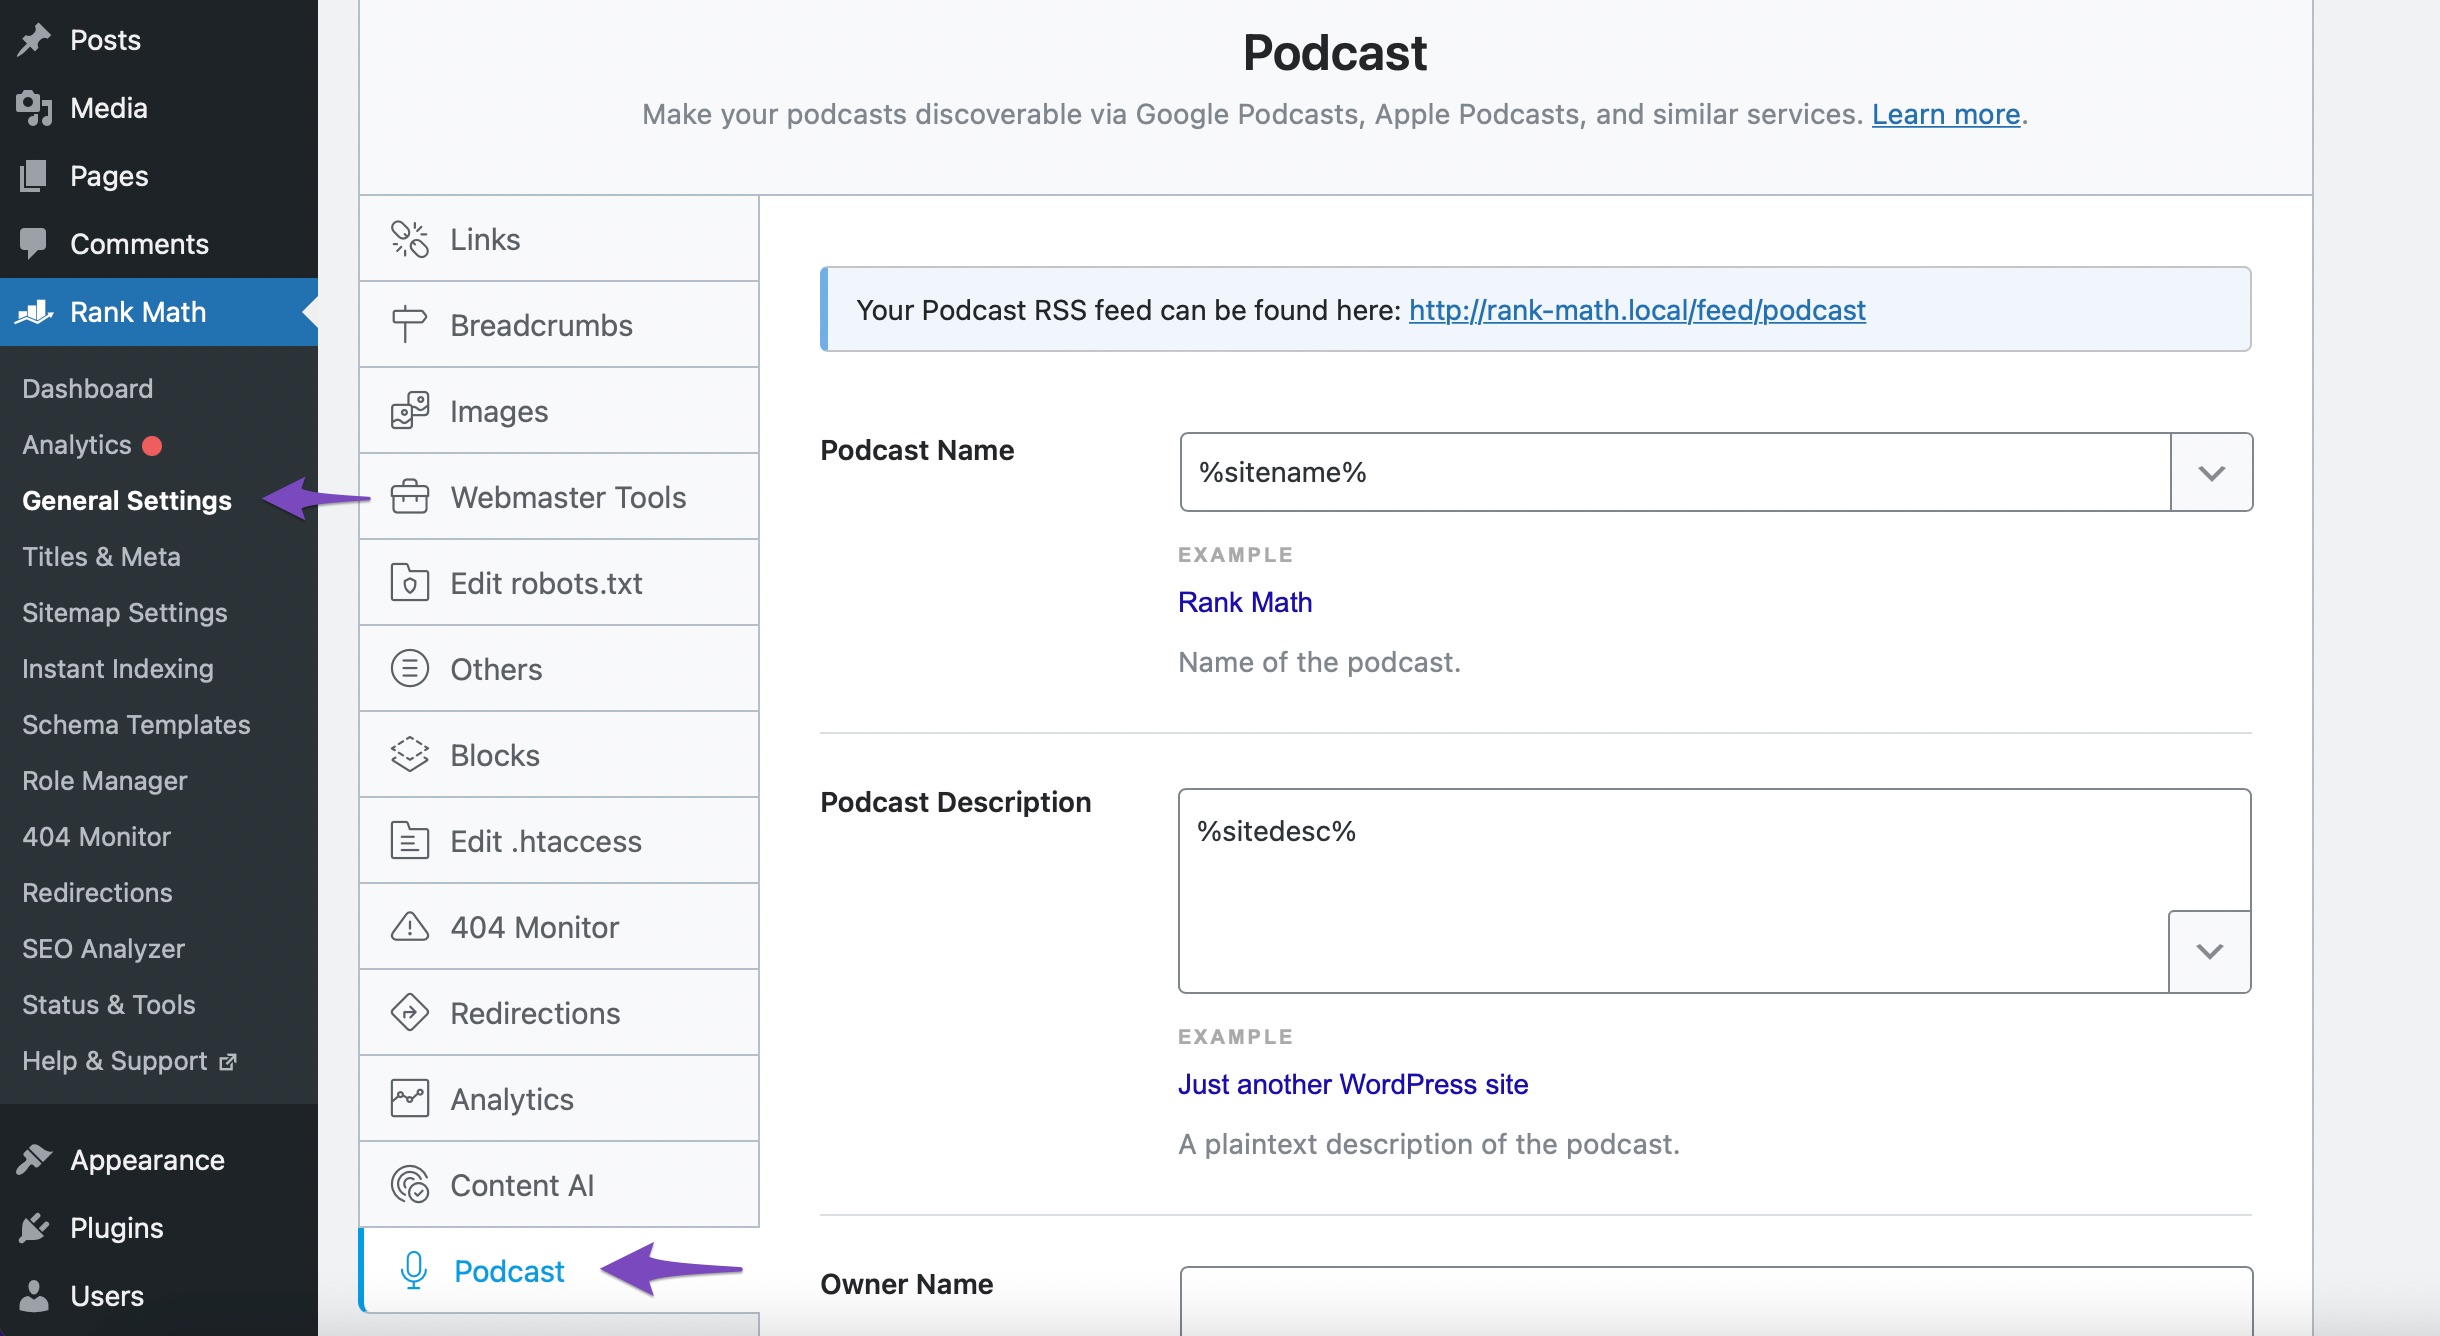 Navigate to Podcast settings